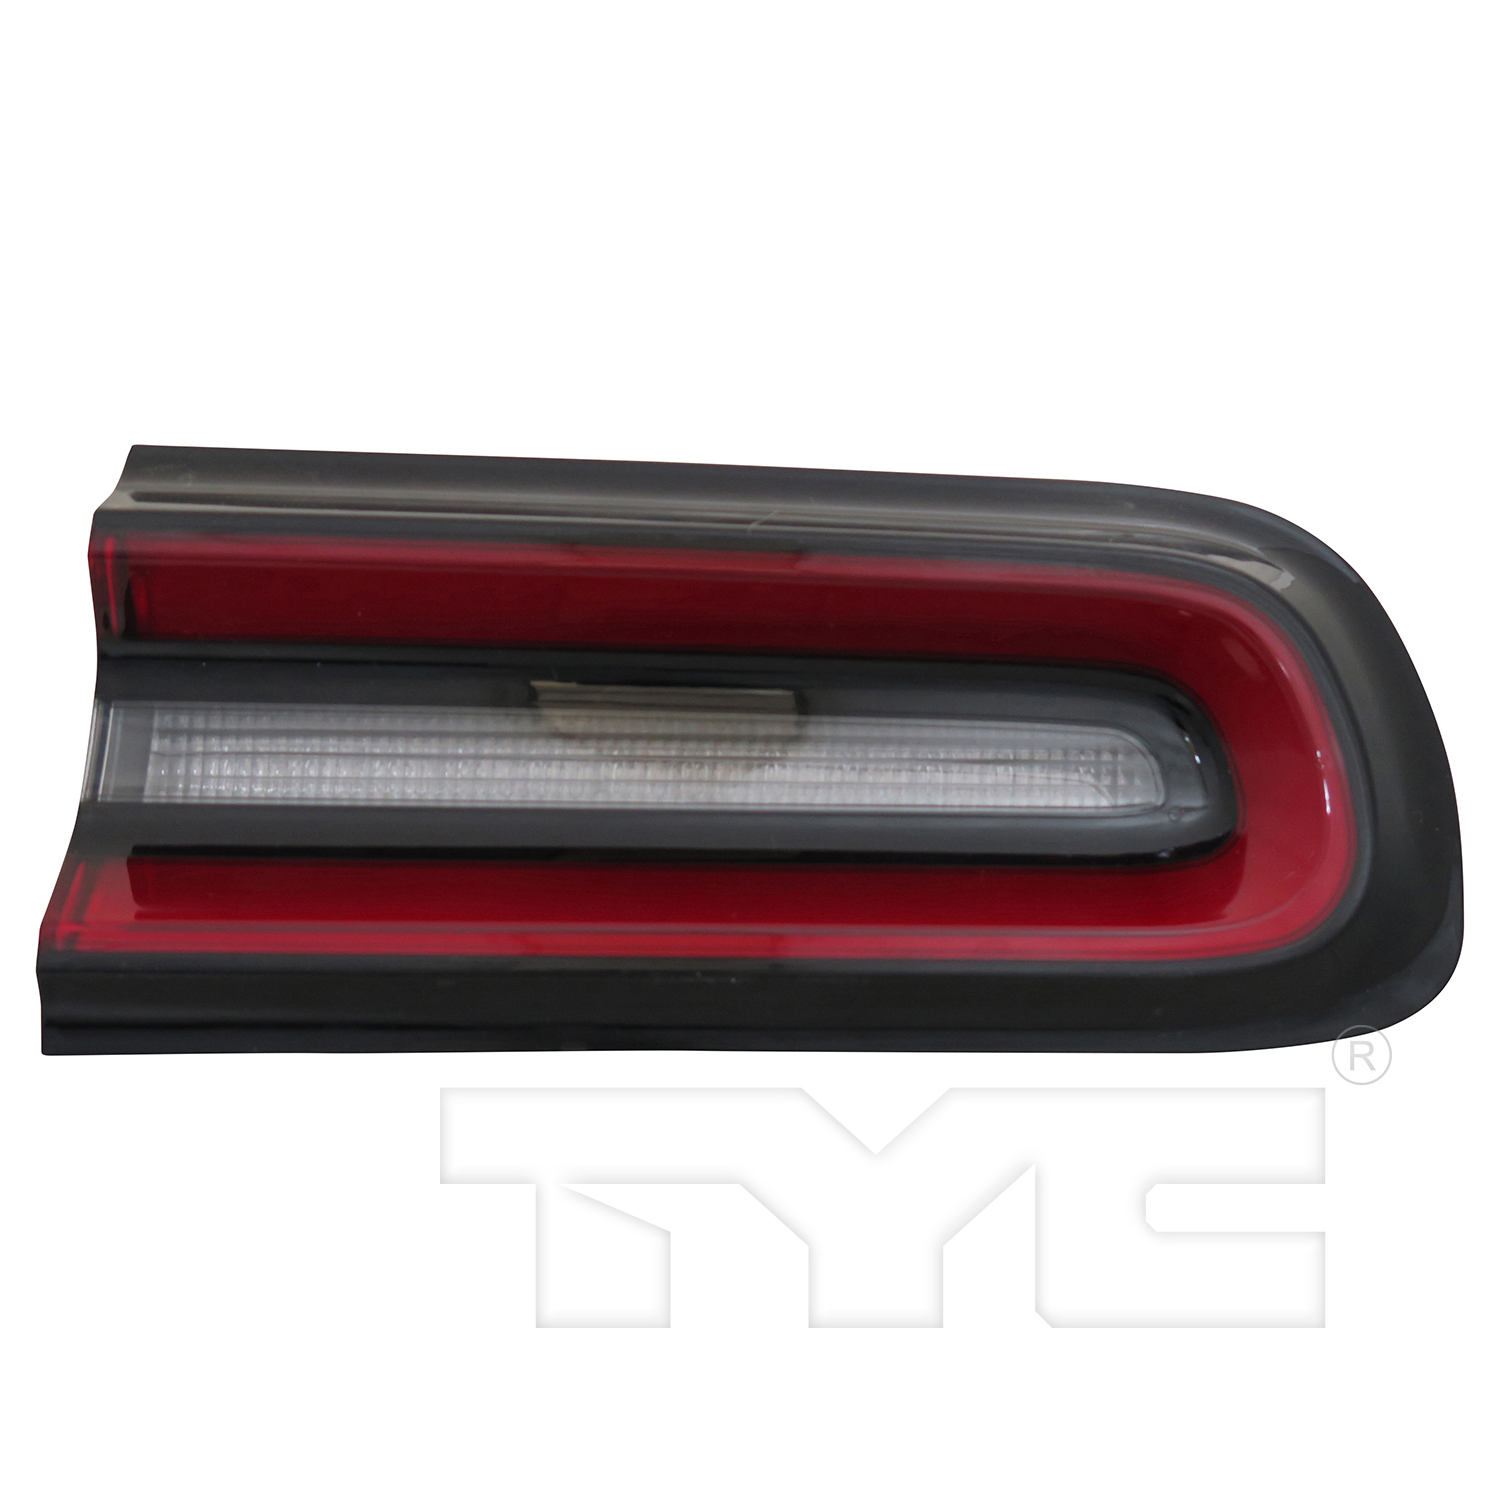 Aftermarket TAILLIGHTS for DODGE - CHALLENGER, CHALLENGER,15-23,RT Taillamp assy